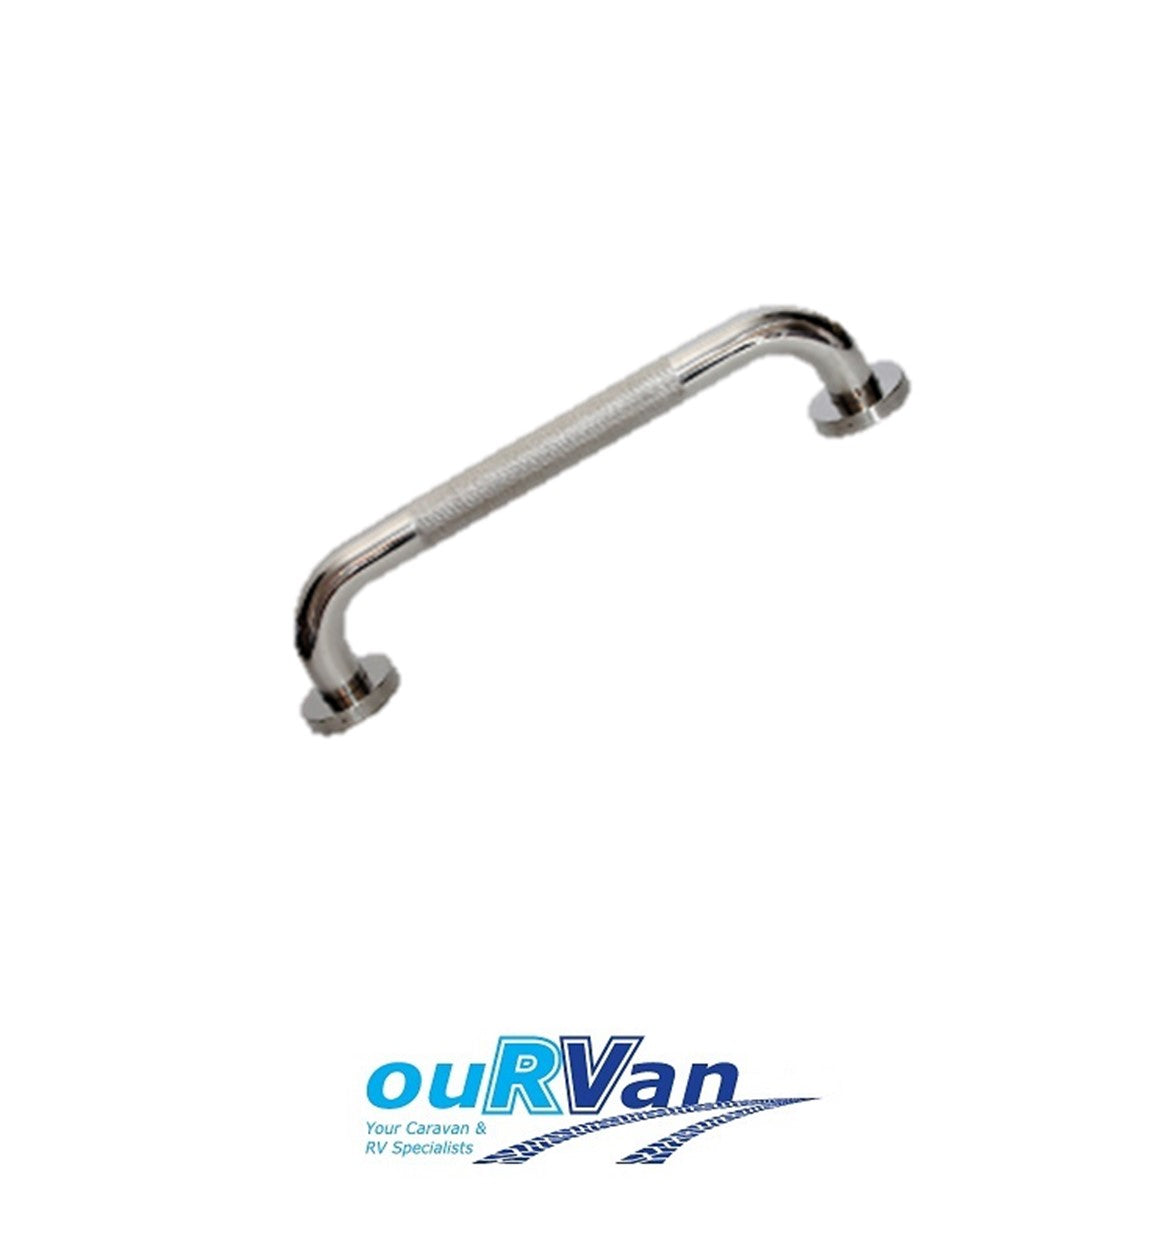 300mm Knurled Stainless Steel Grab Bar – Gb305g